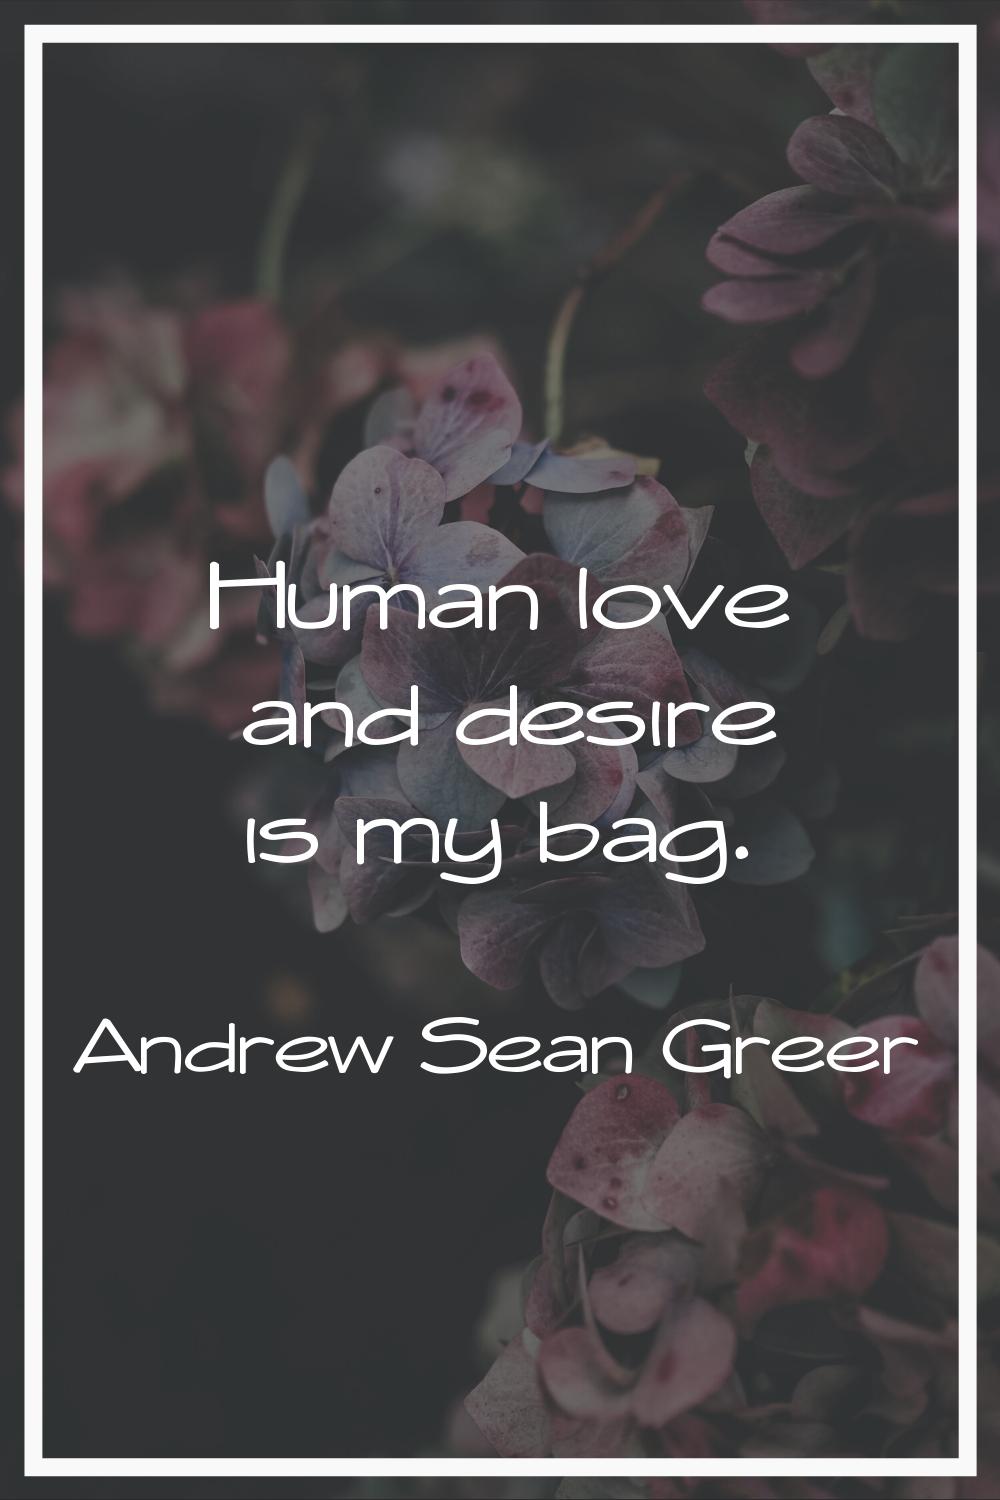 Human love and desire is my bag.